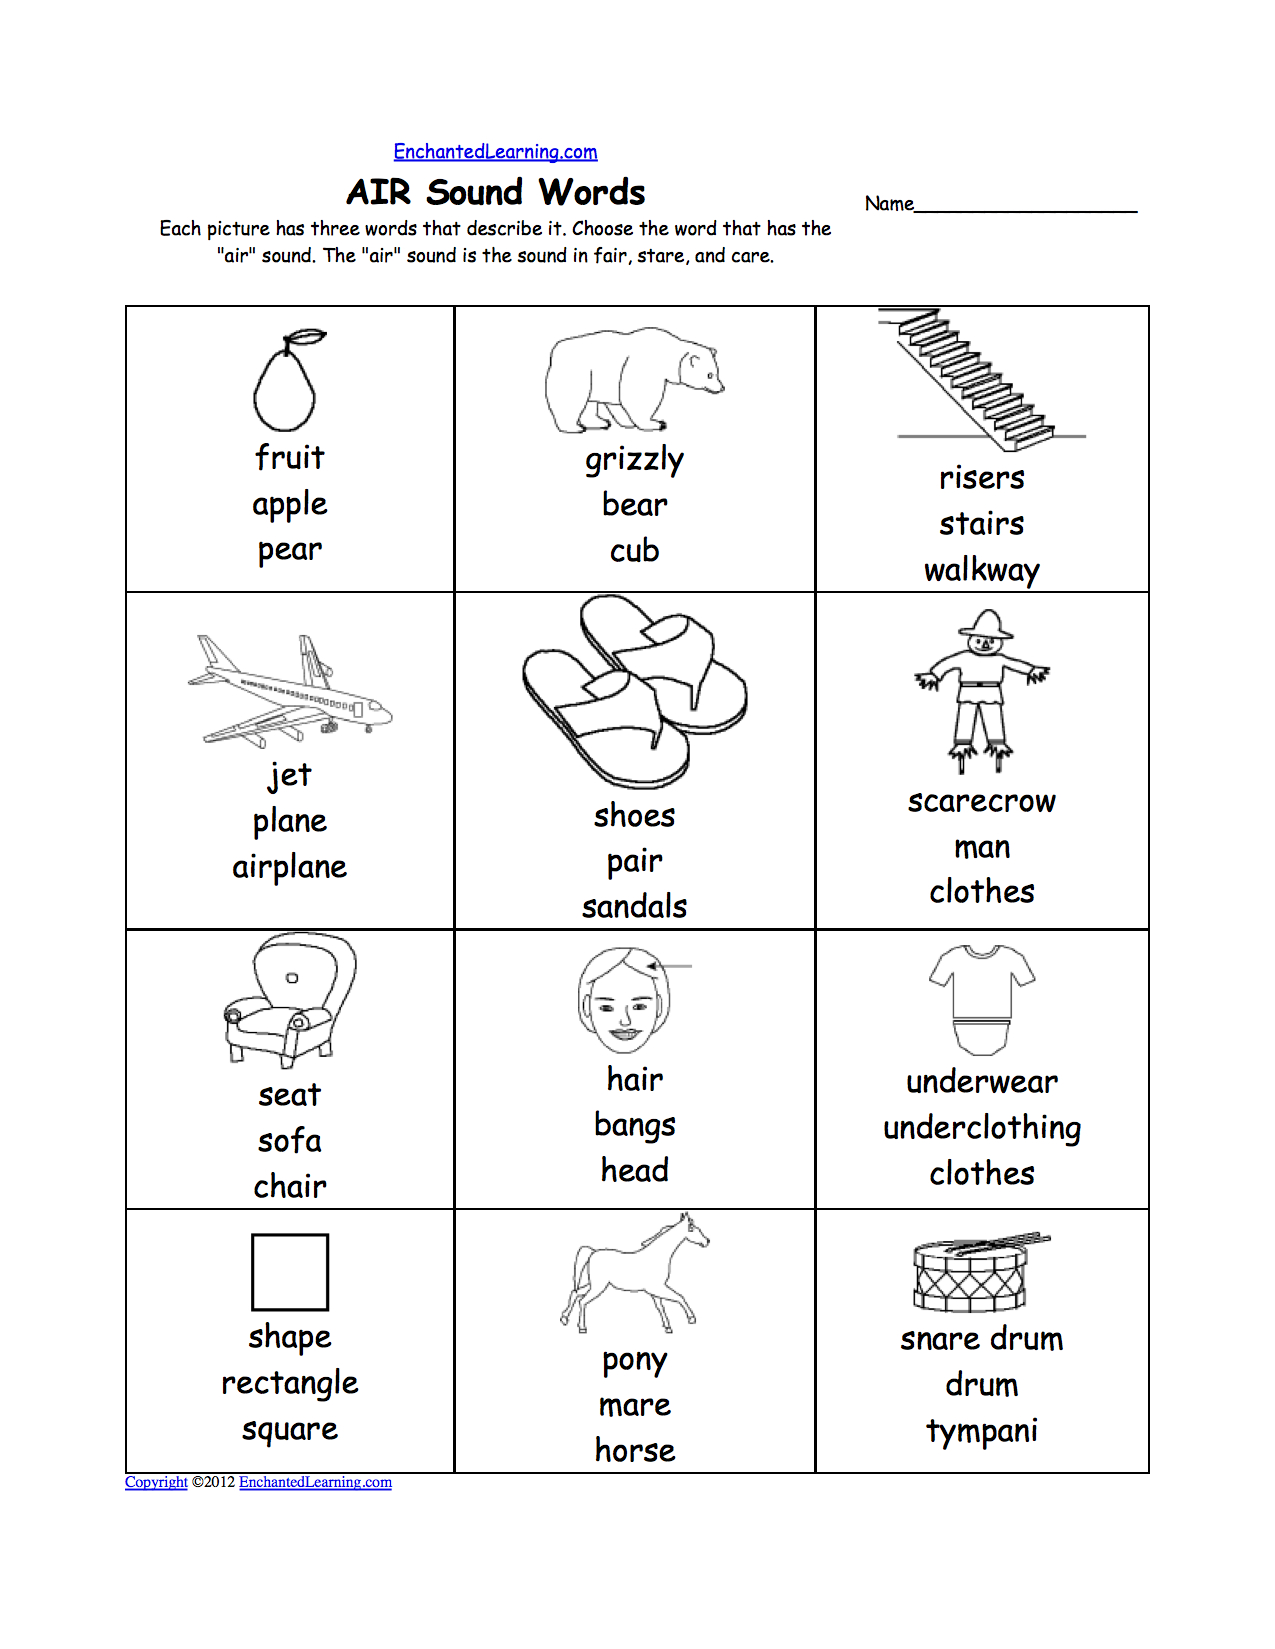 phonics-worksheets-multiple-choice-worksheets-to-print-db-excel